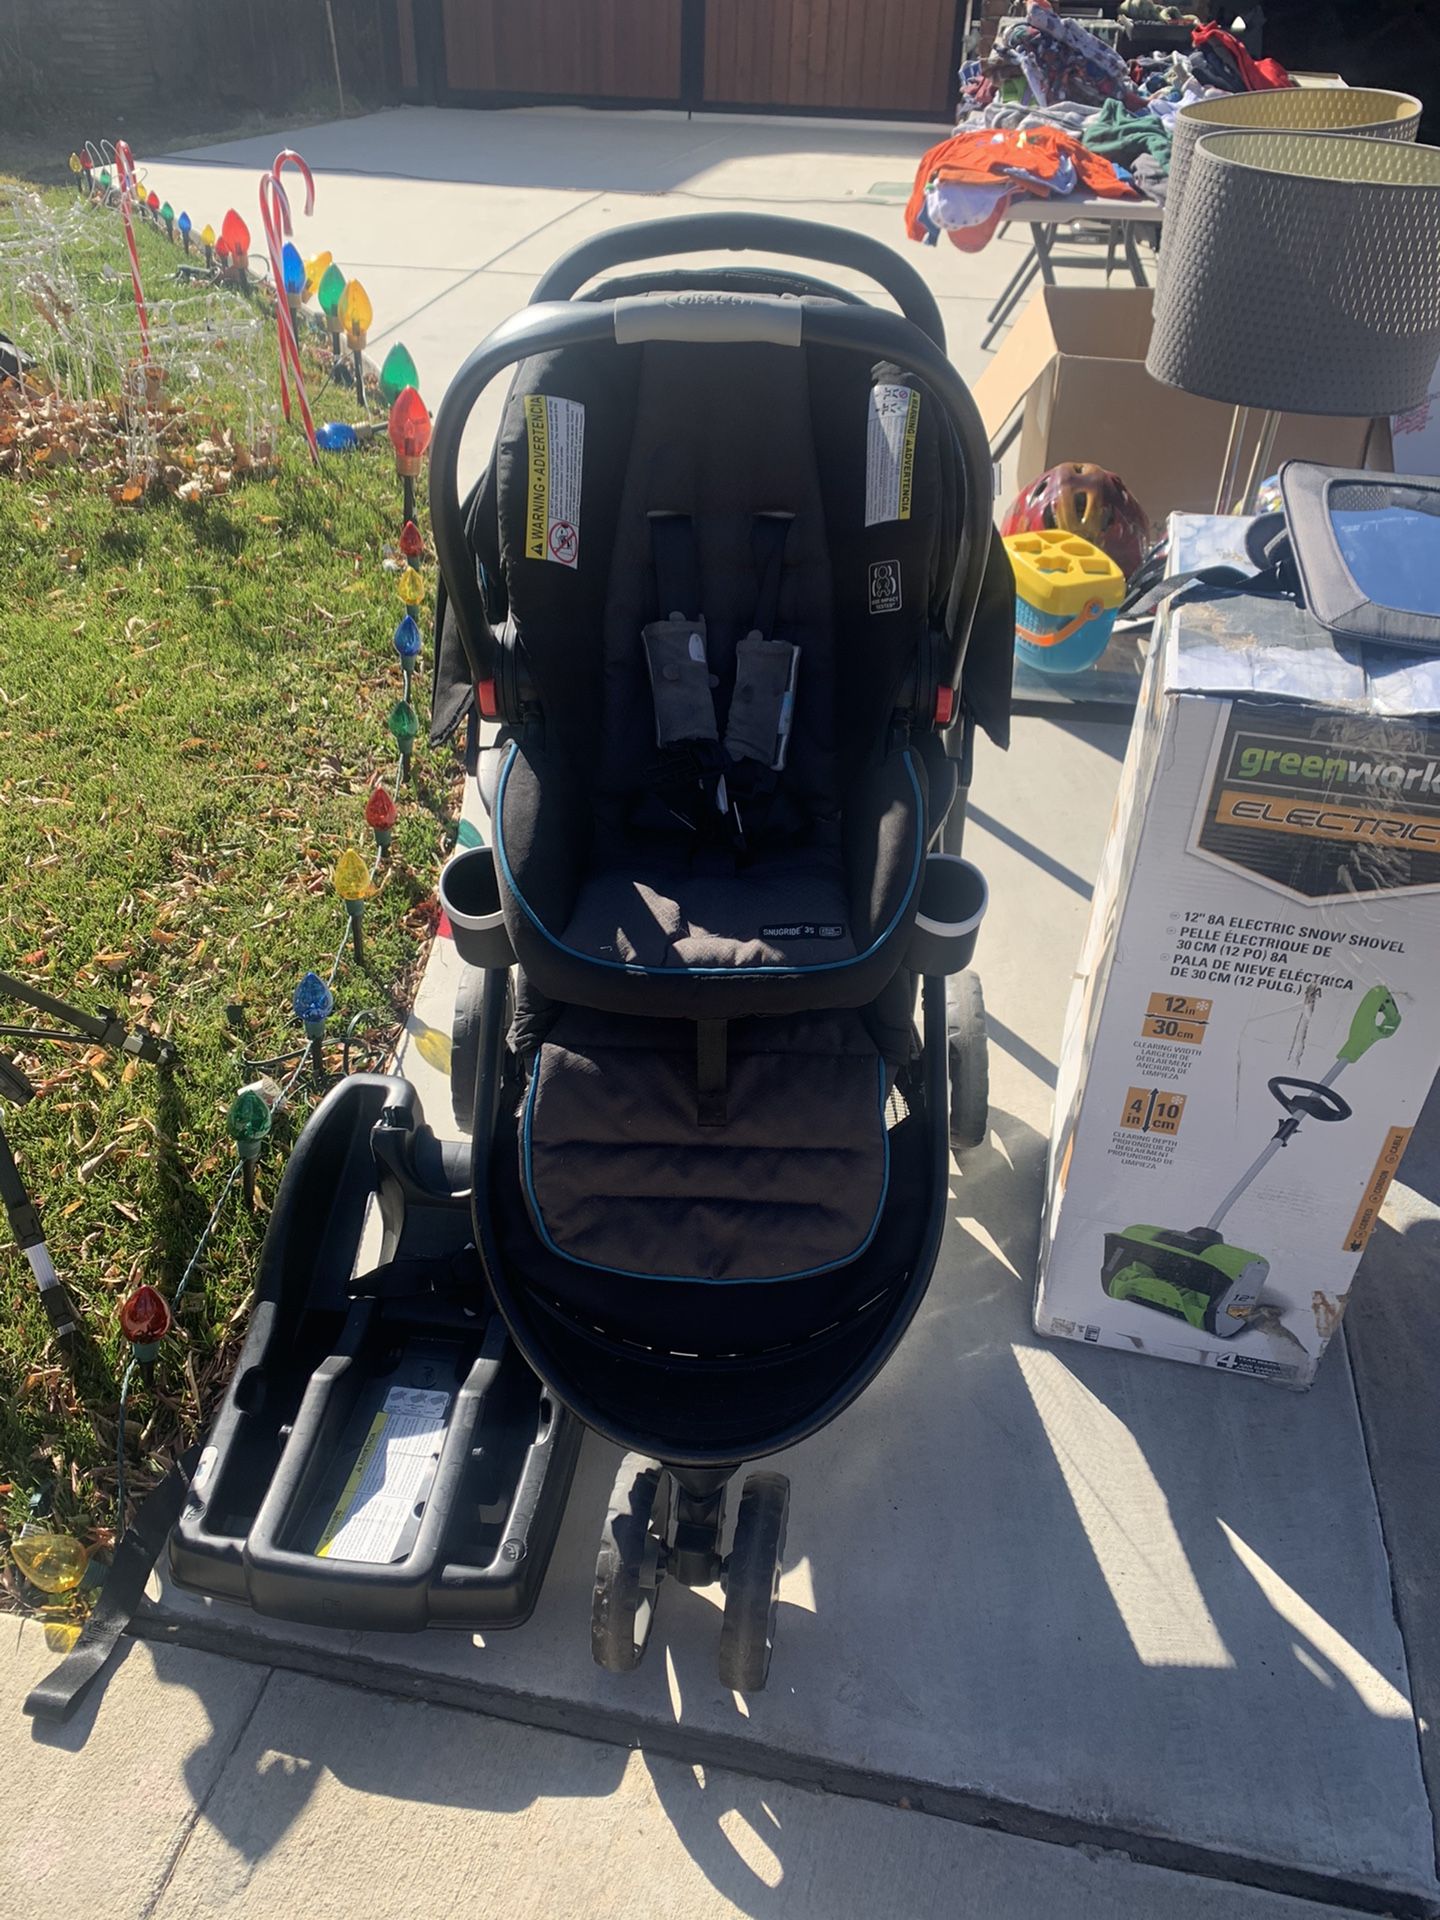 Stroller With car seat Attachment